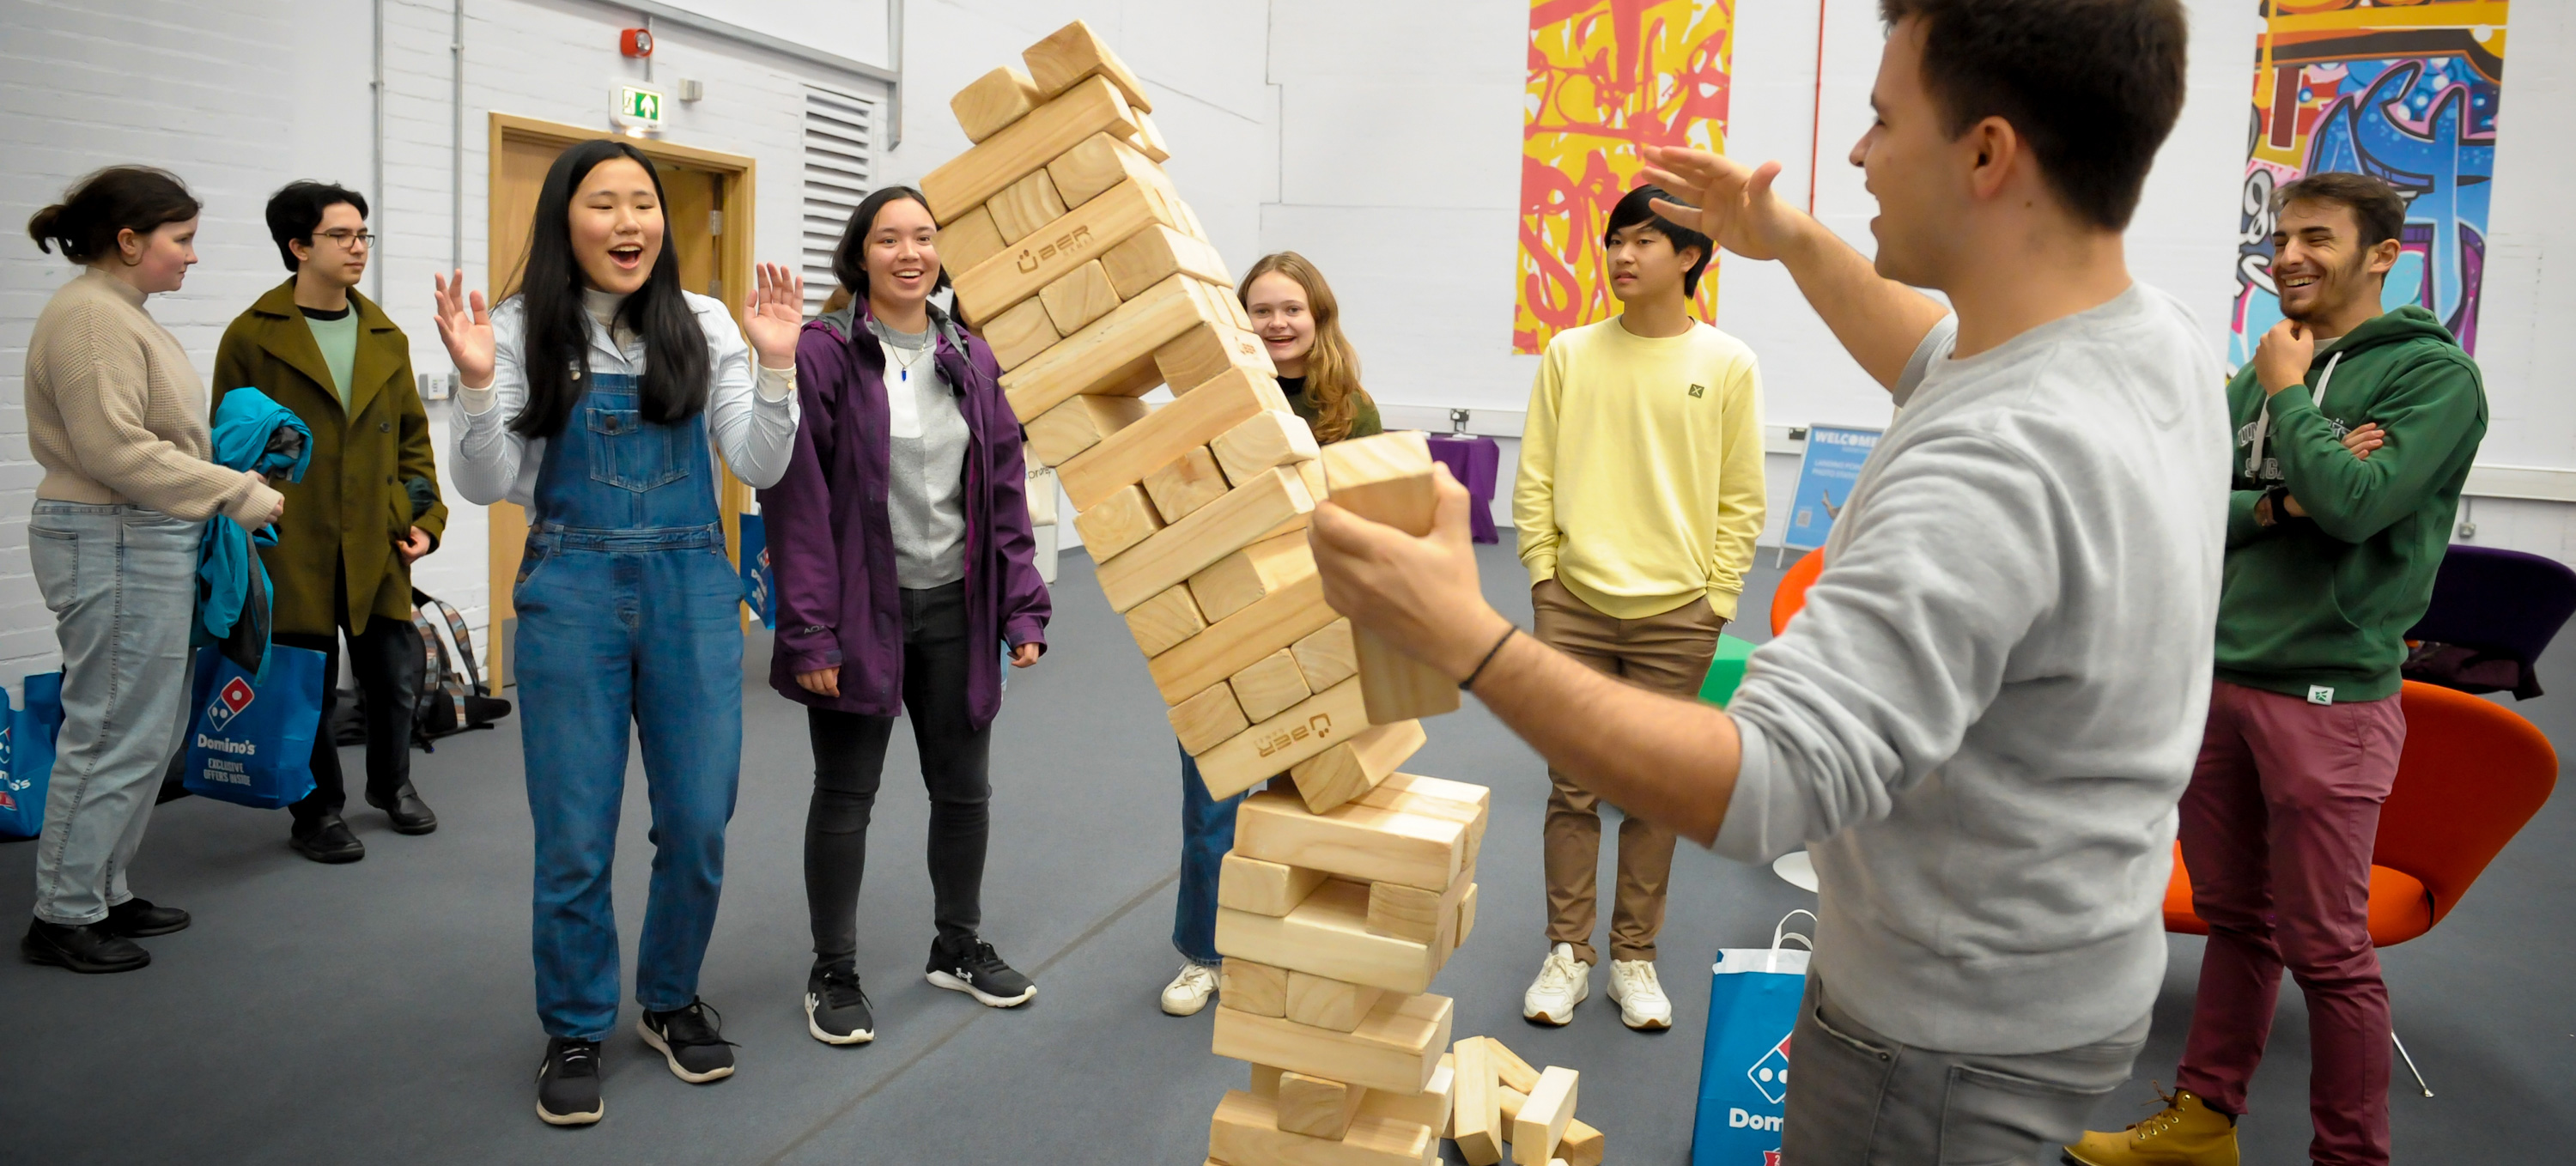  A group of students playing giant Jenga, the blocks are falling towards a female student who raises her arms in surprise.